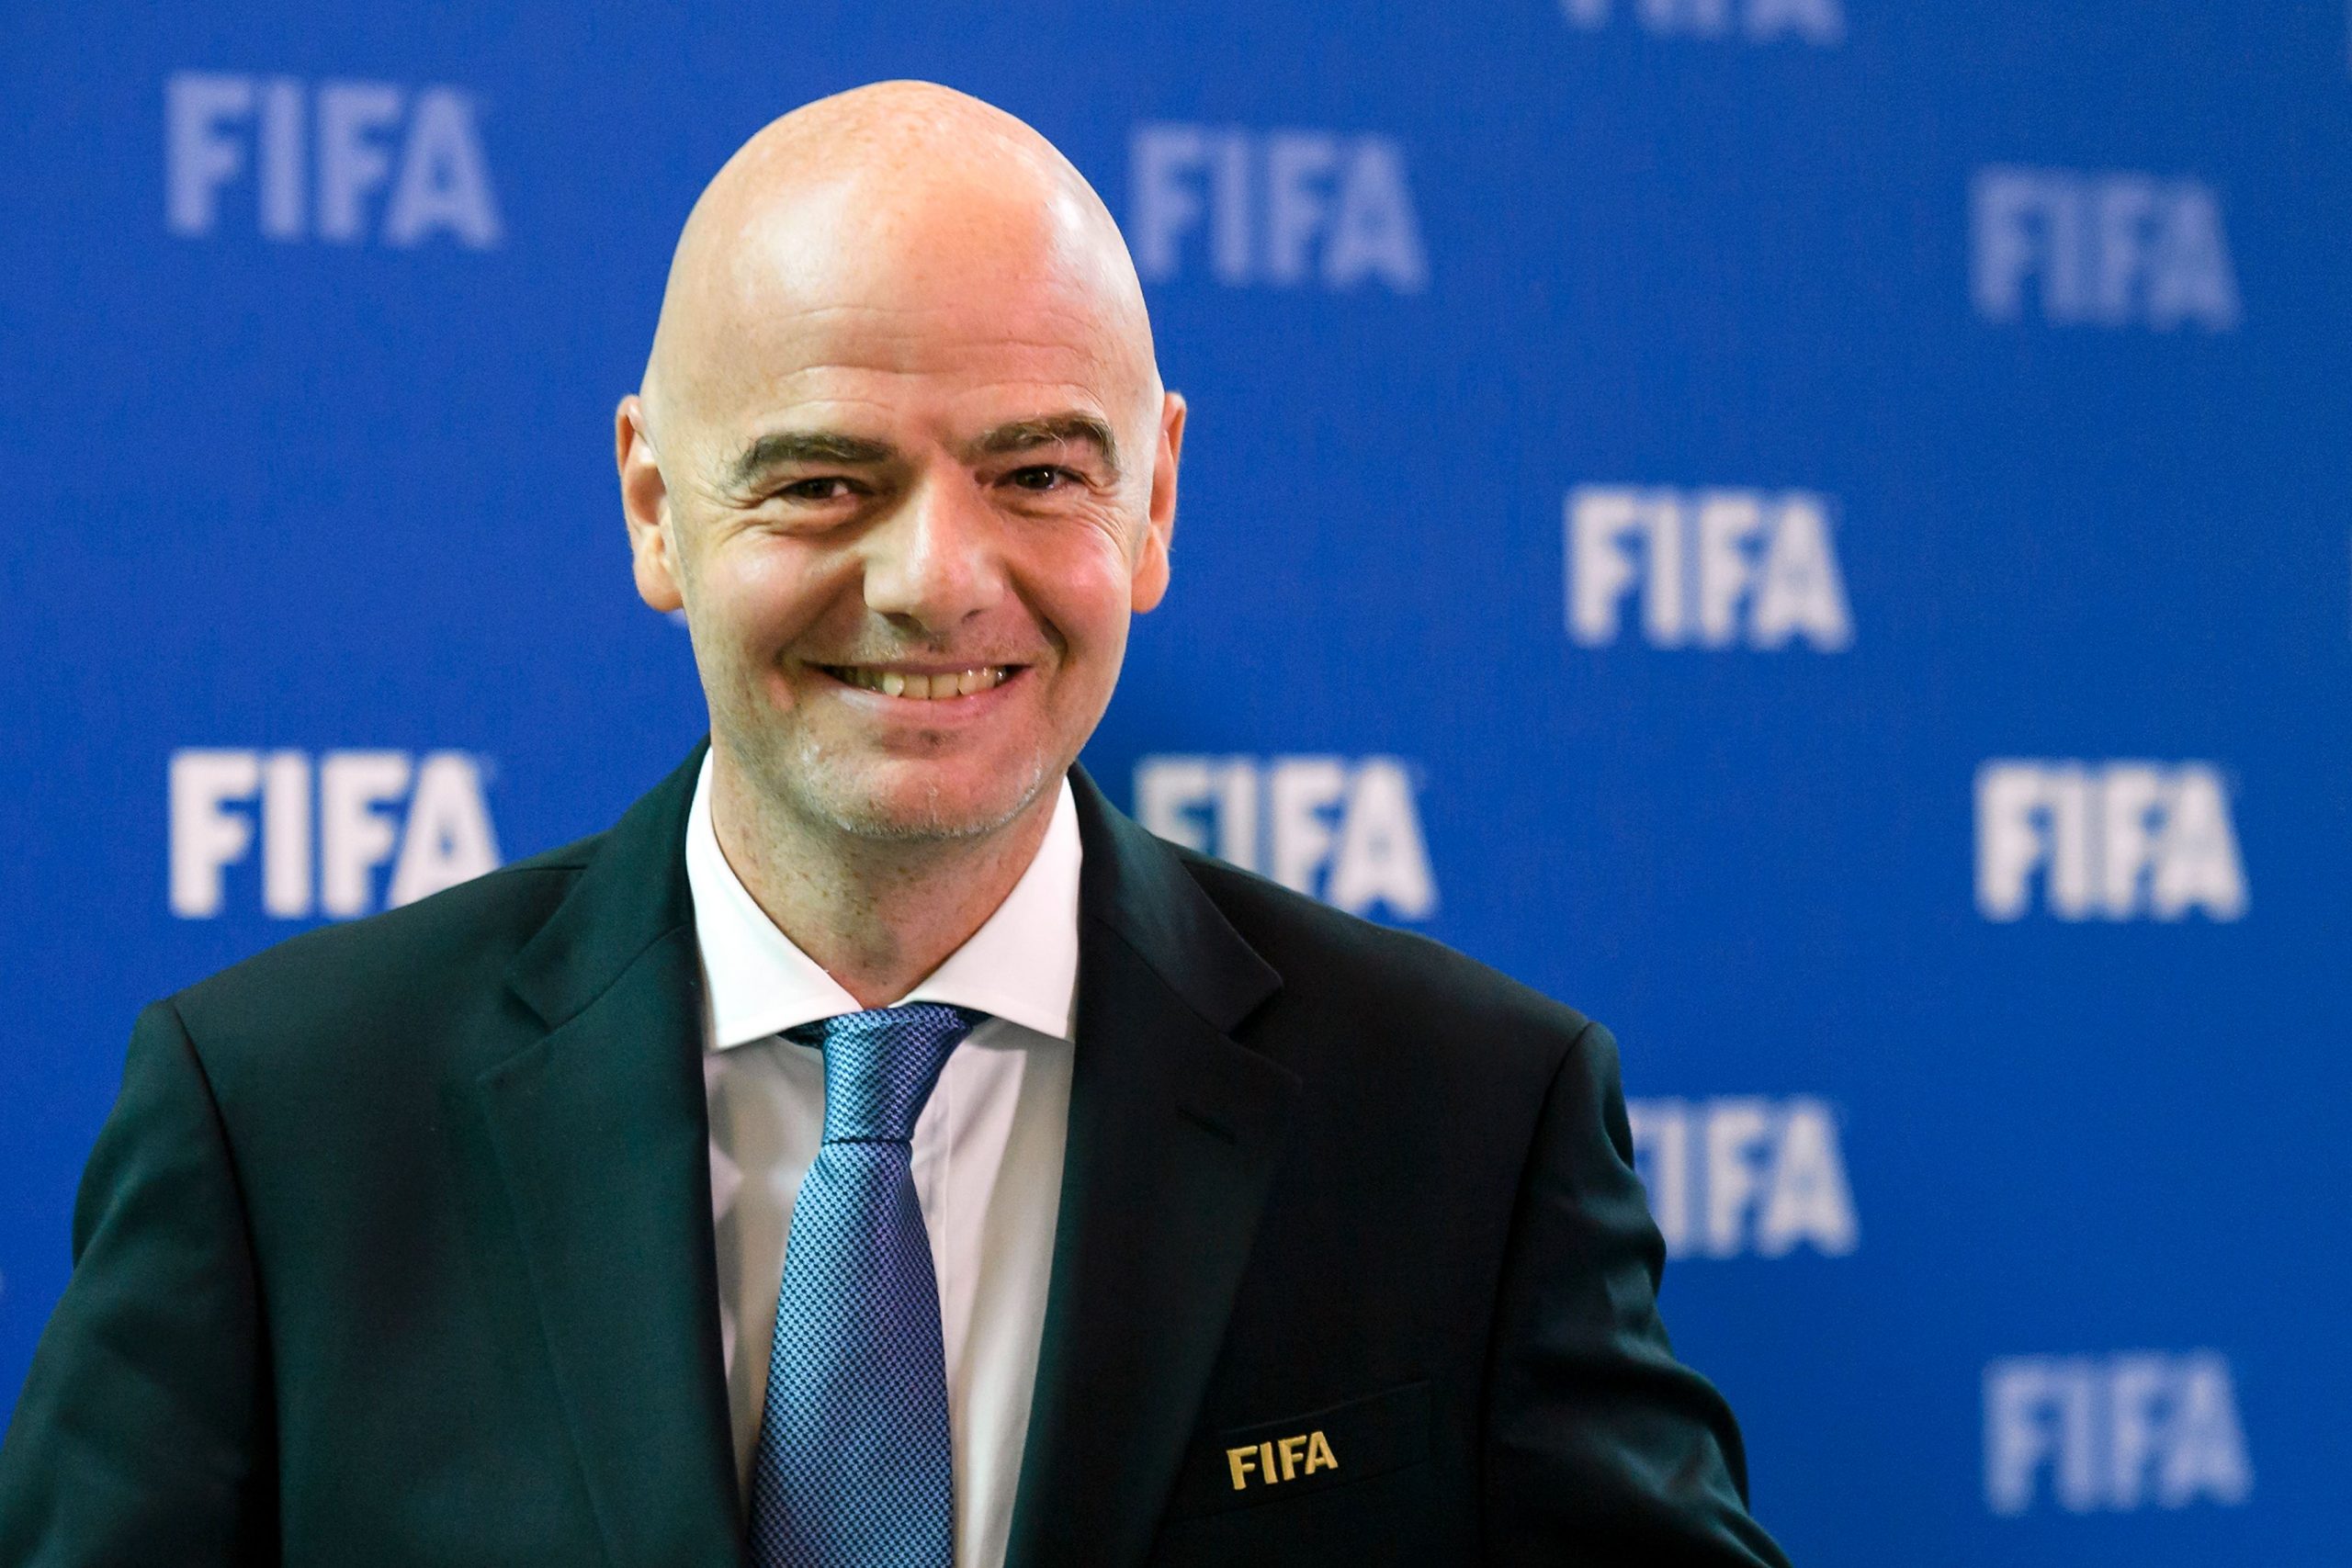 Arabic proposed as official FIFA language